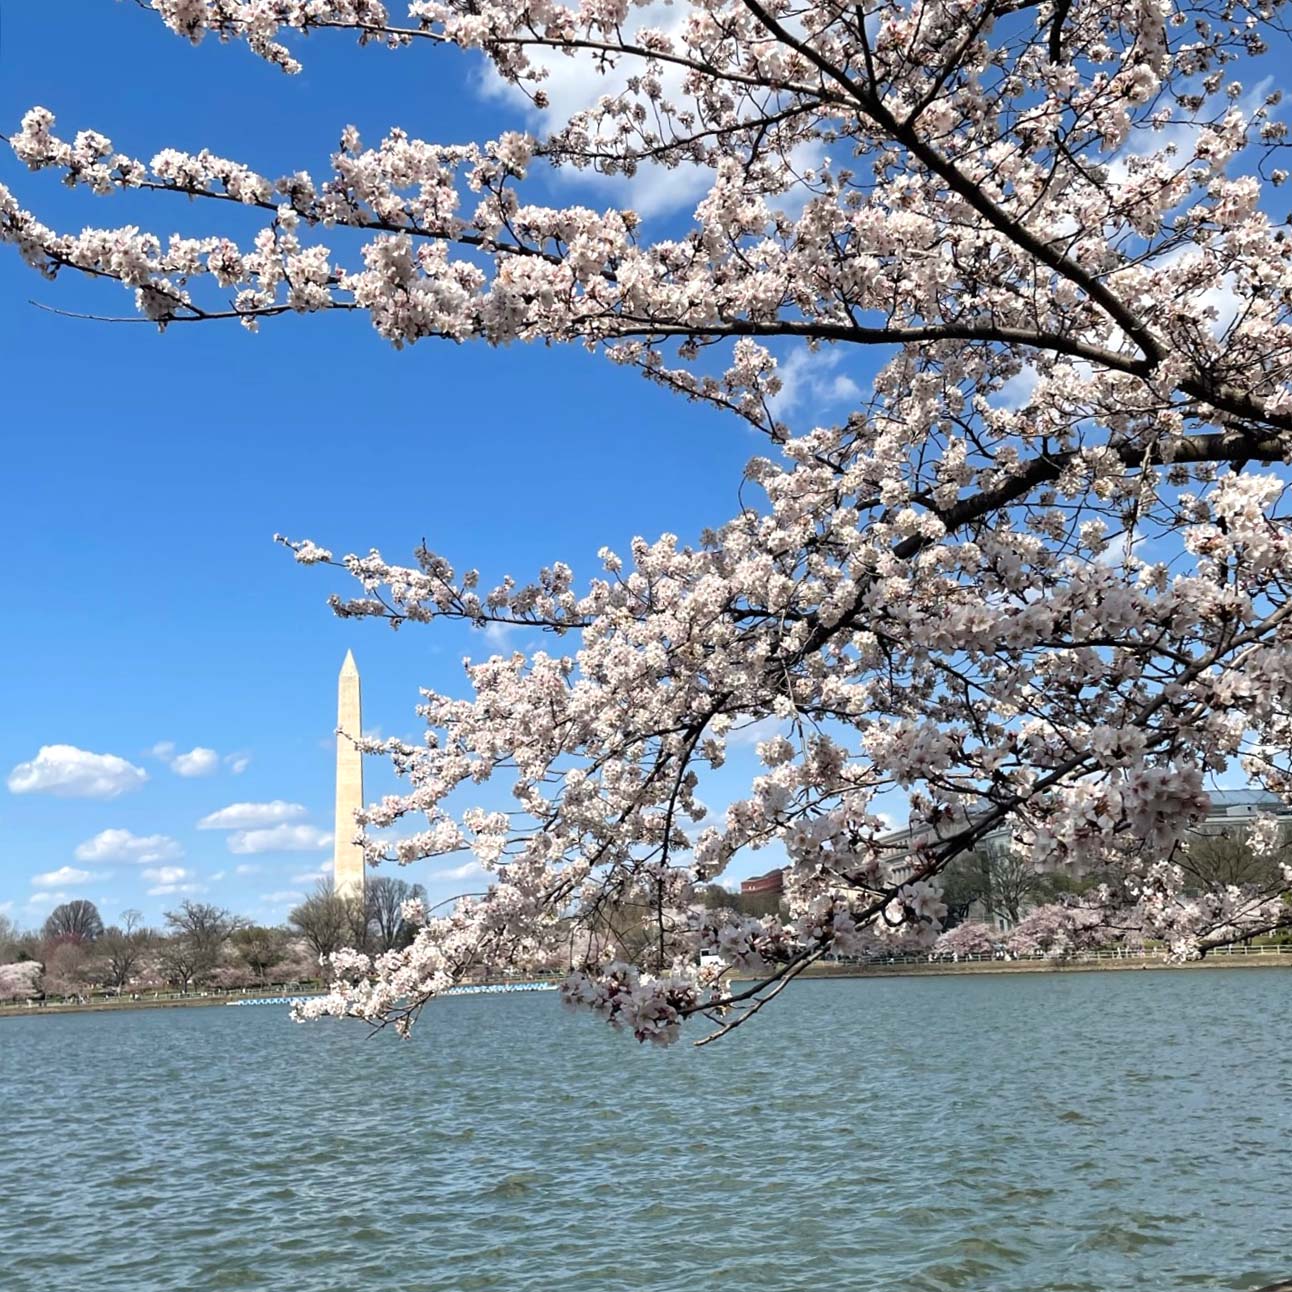 Cherry blossoms in full bloom with the Washington Monument in the distance.